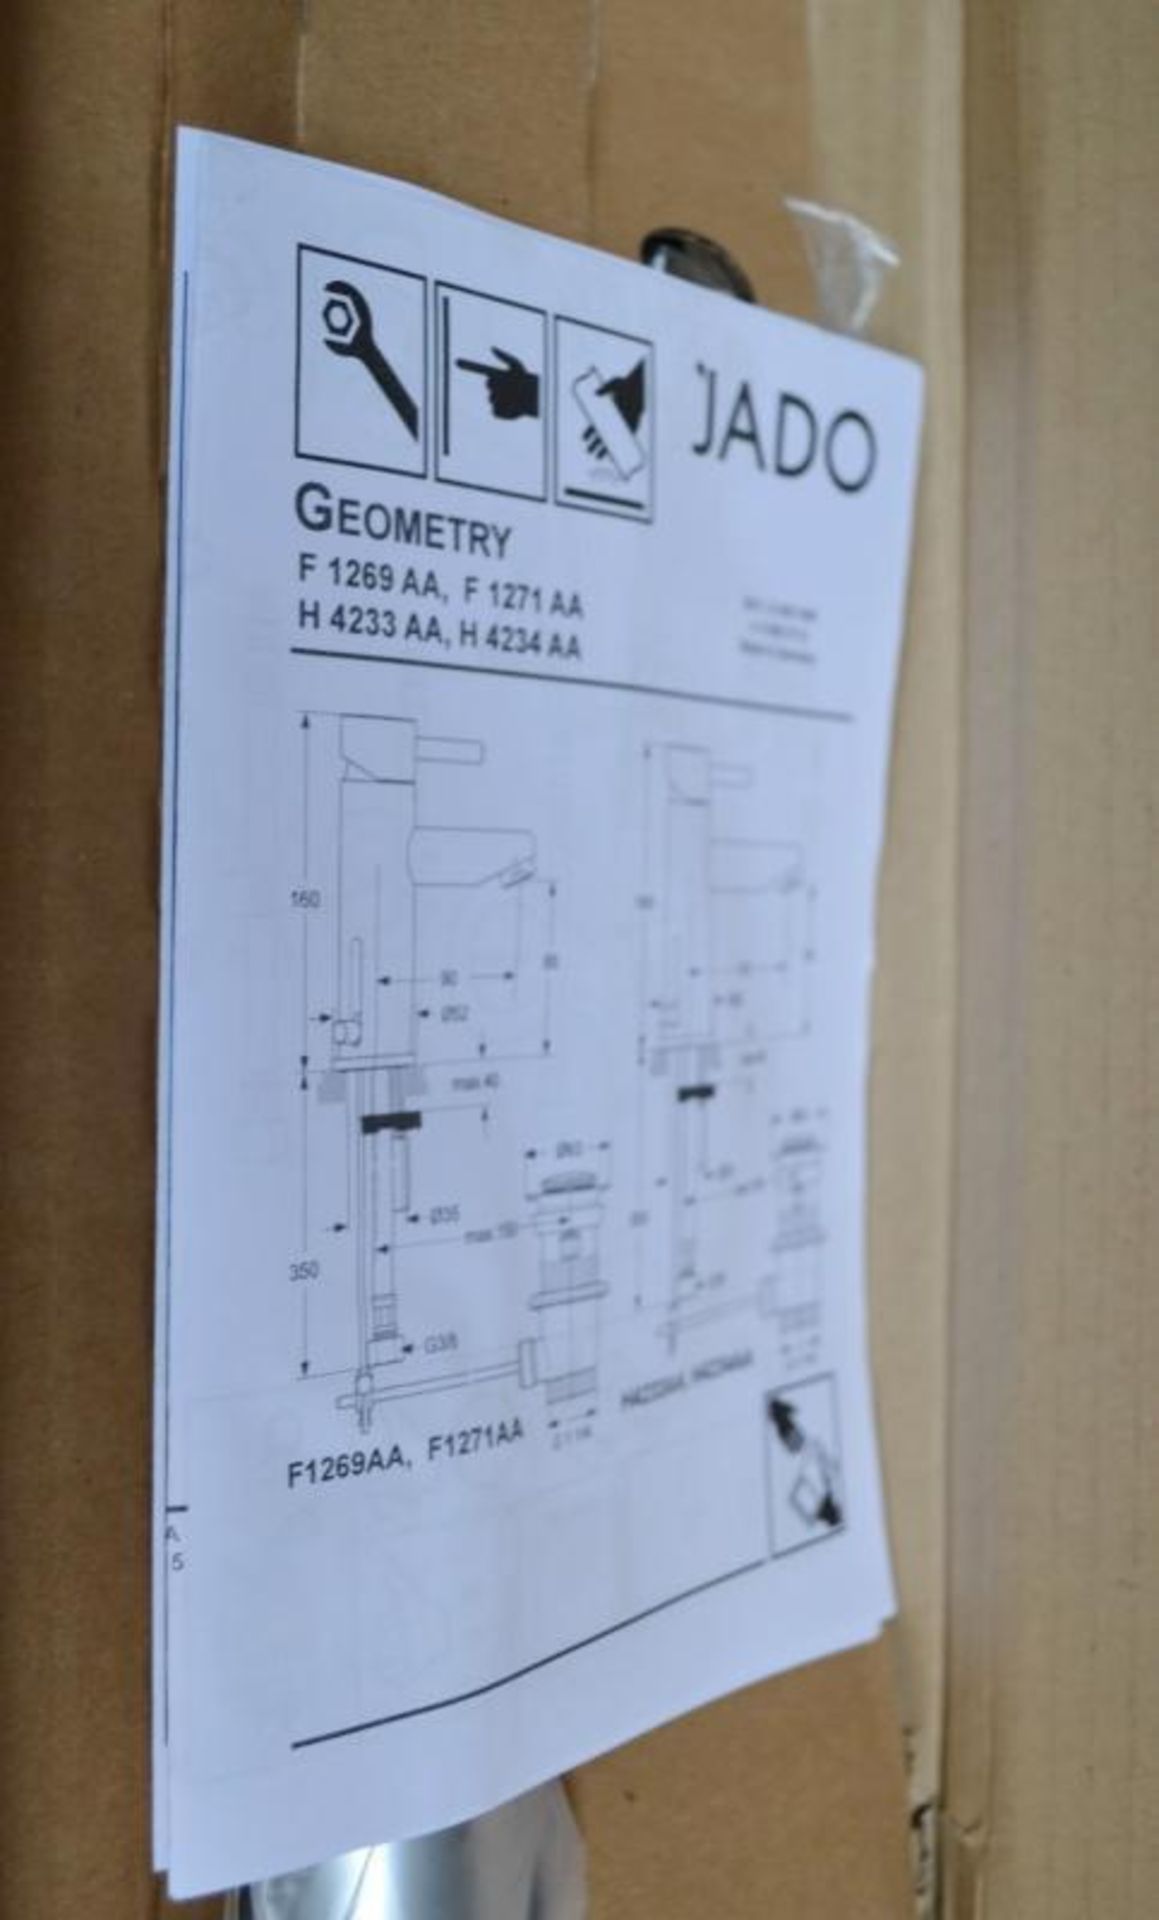 1 x Ideal Standard JADO "Geometry" Single Lever Deck-Mounted Basin Mixer Without Waste Set (F1271AA) - Image 3 of 8